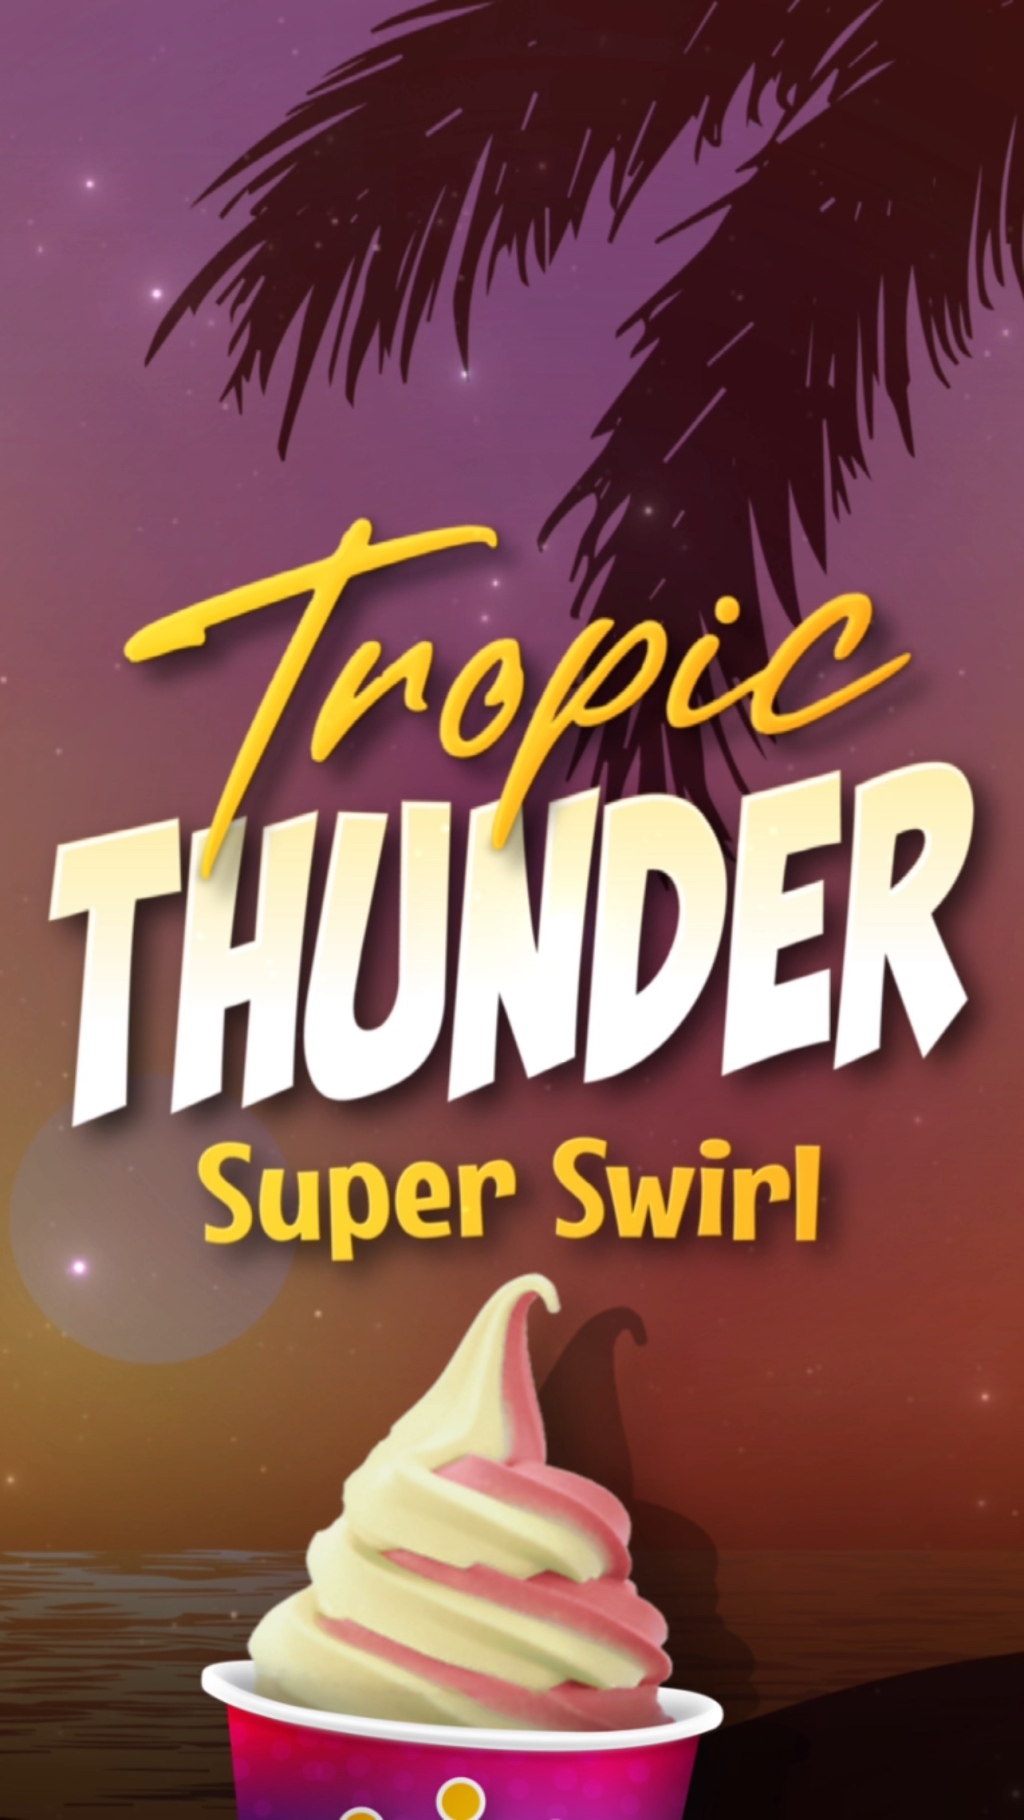 Cool King® “Tropic Thunder Super Swirl” Motion Graphic and Flavor Card